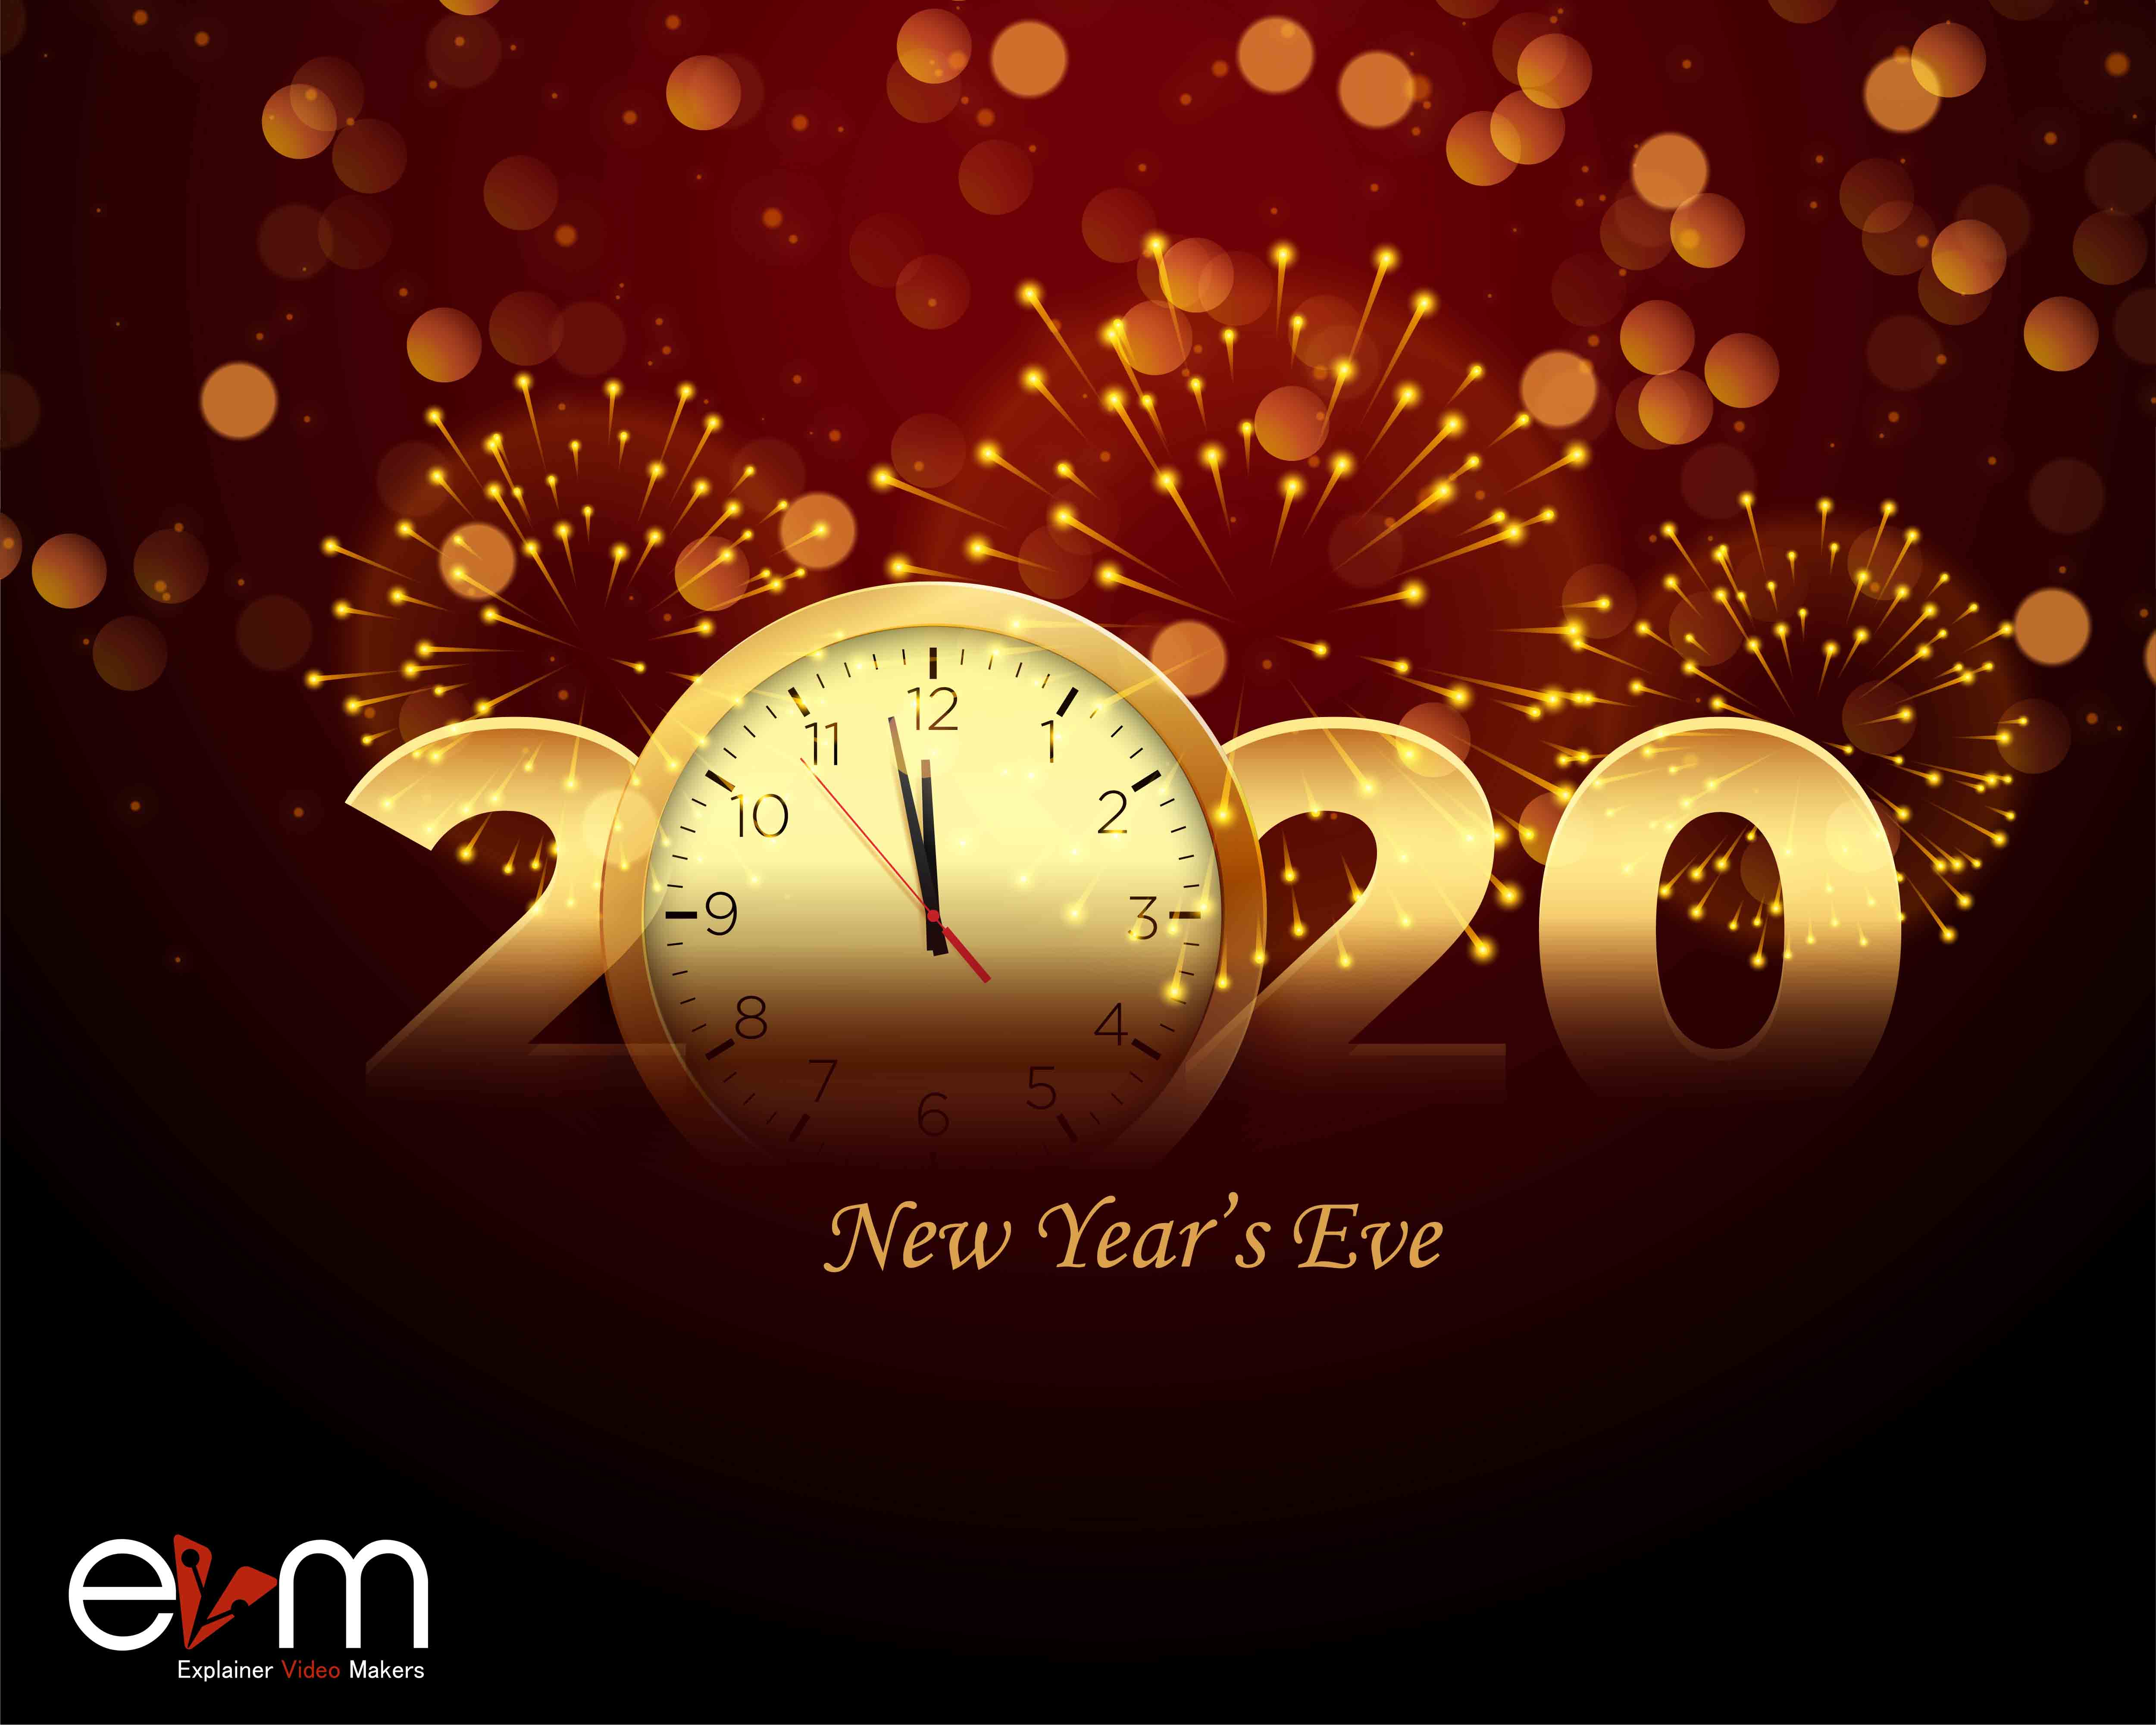 31st December New Year’s Eve Explainer Video Makers